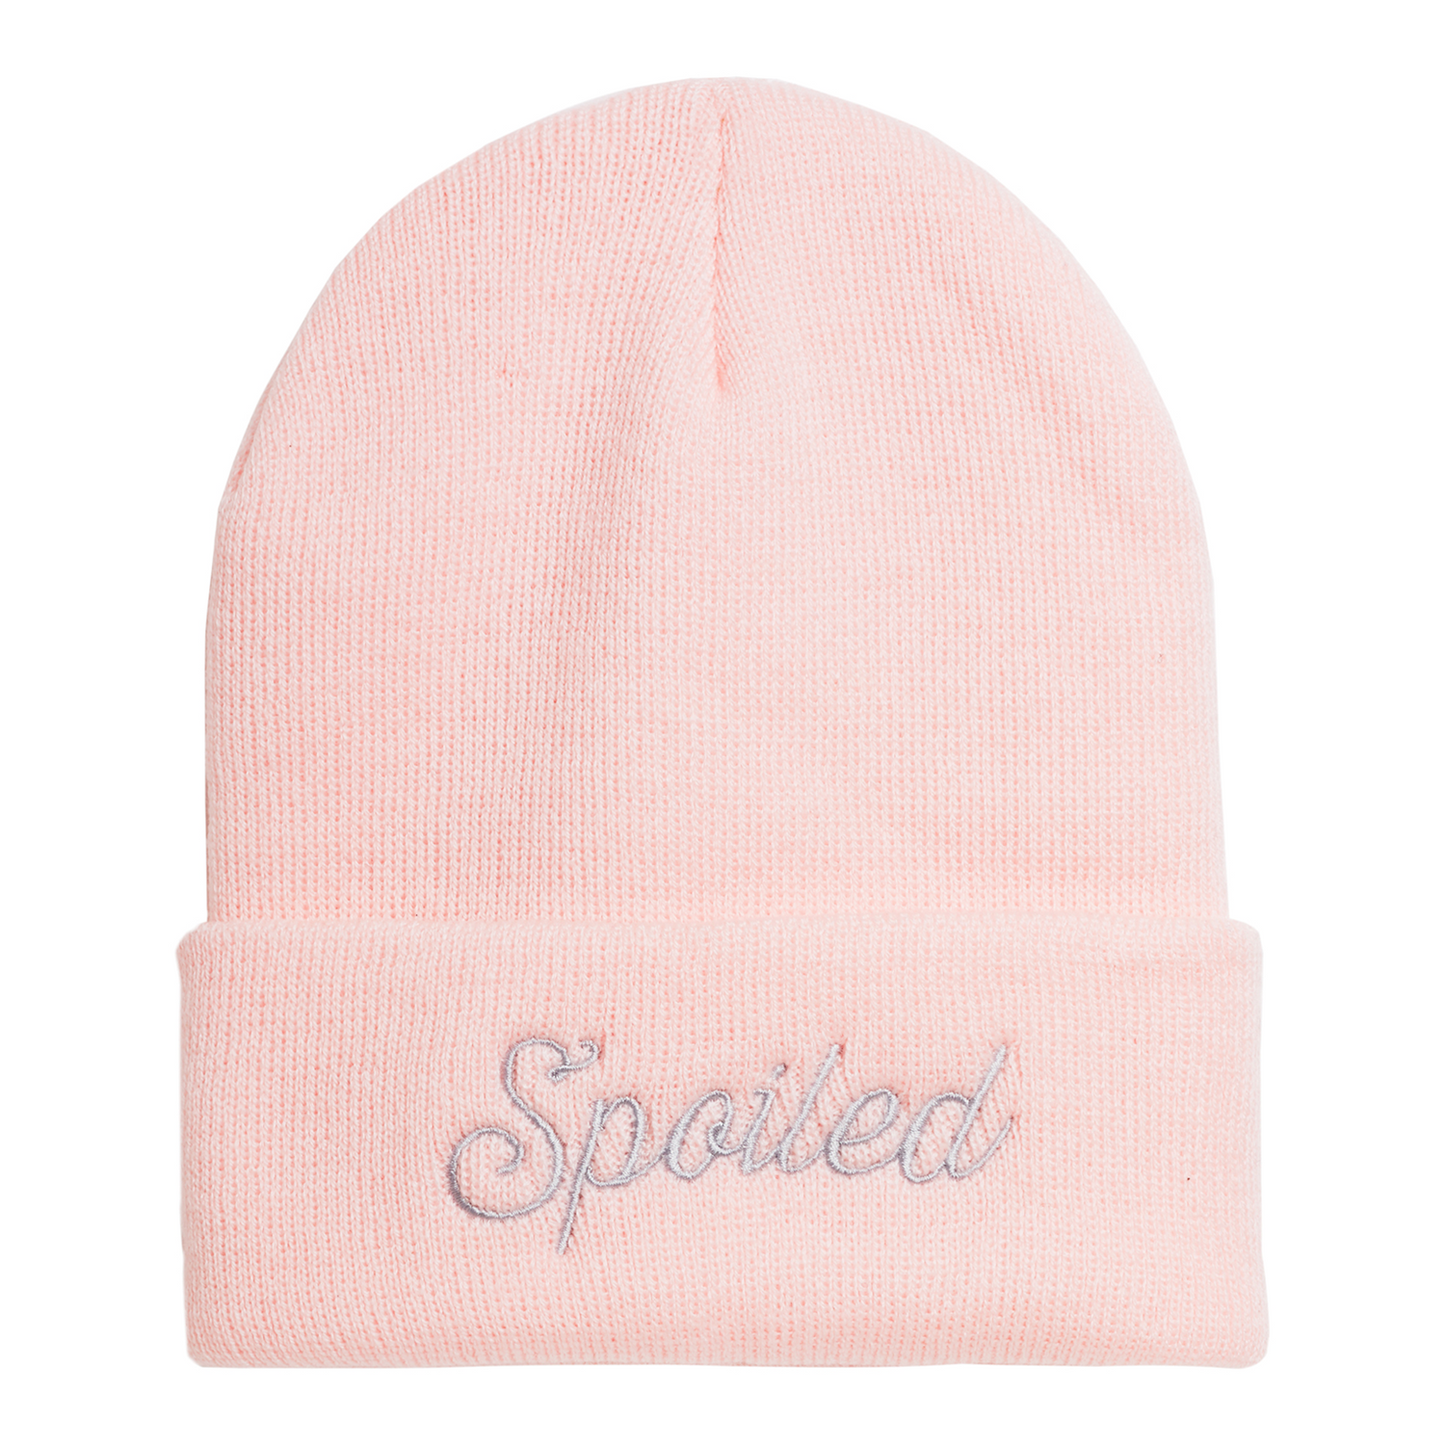 Spoiled Beanie - pink